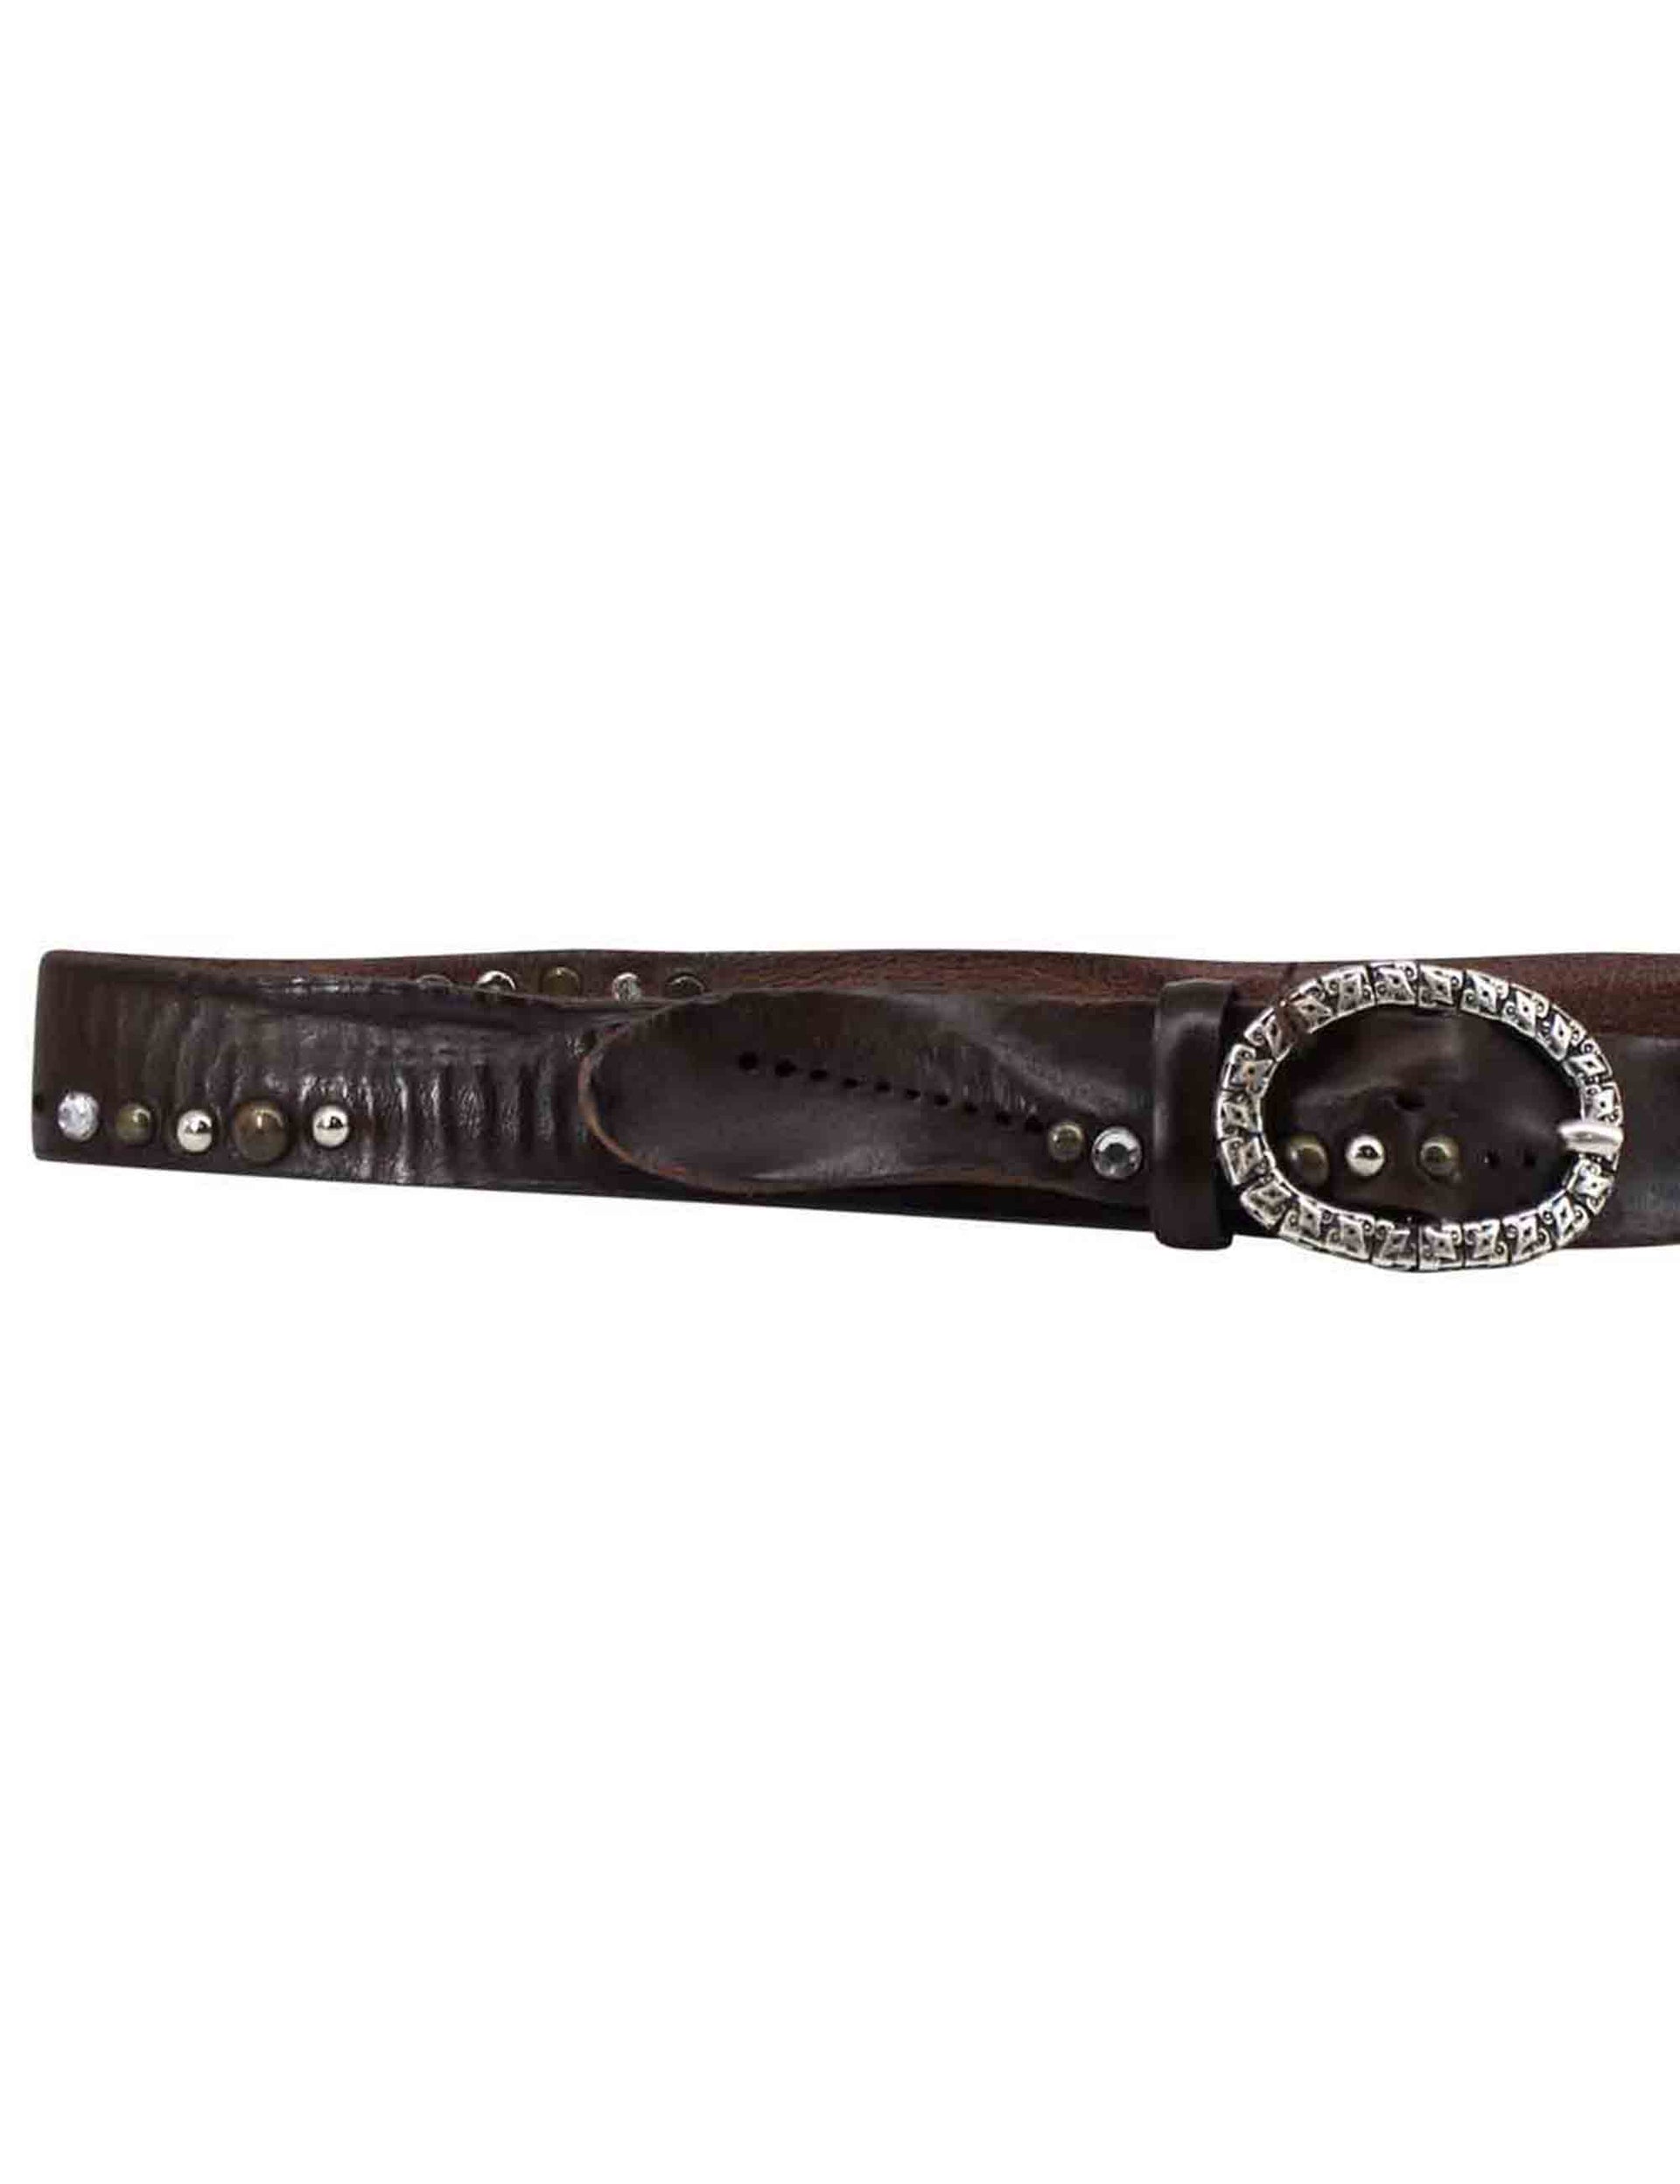 Women's belts in dark brown leather with studs